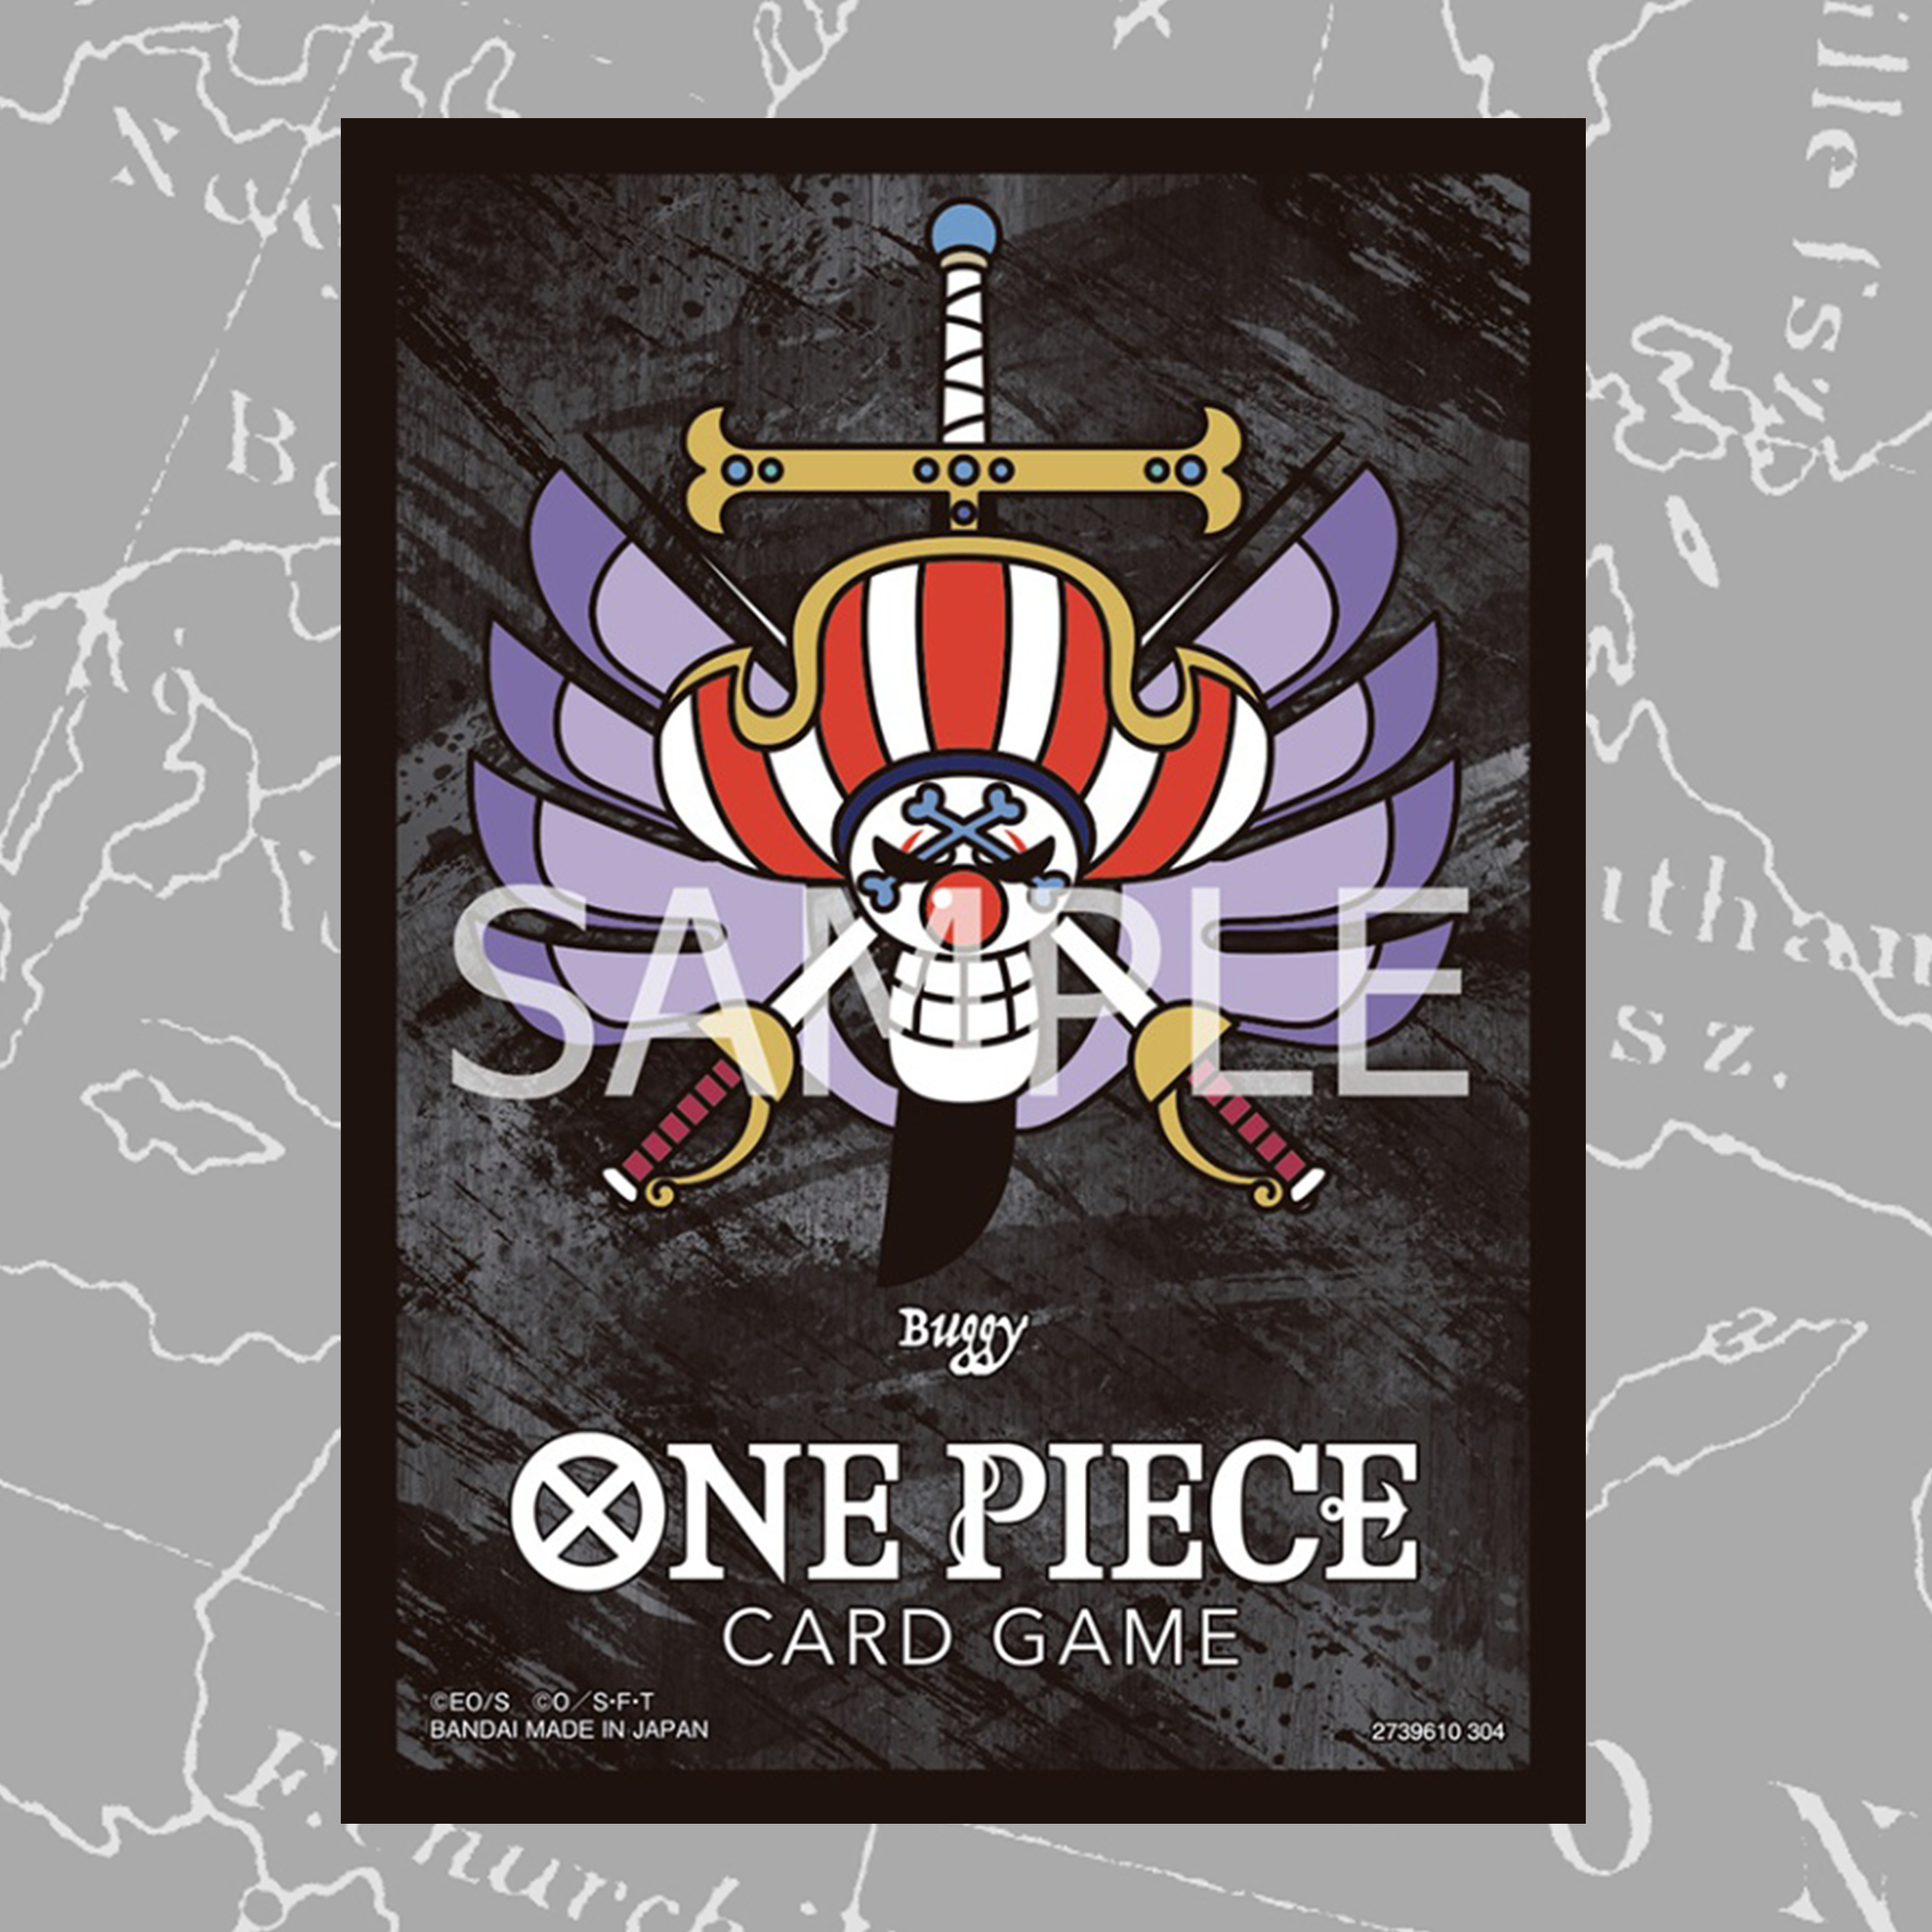 BANDAI ONE PIECE CARD GAME - Official Limited Card Sleeve Premium Matte - Buggy